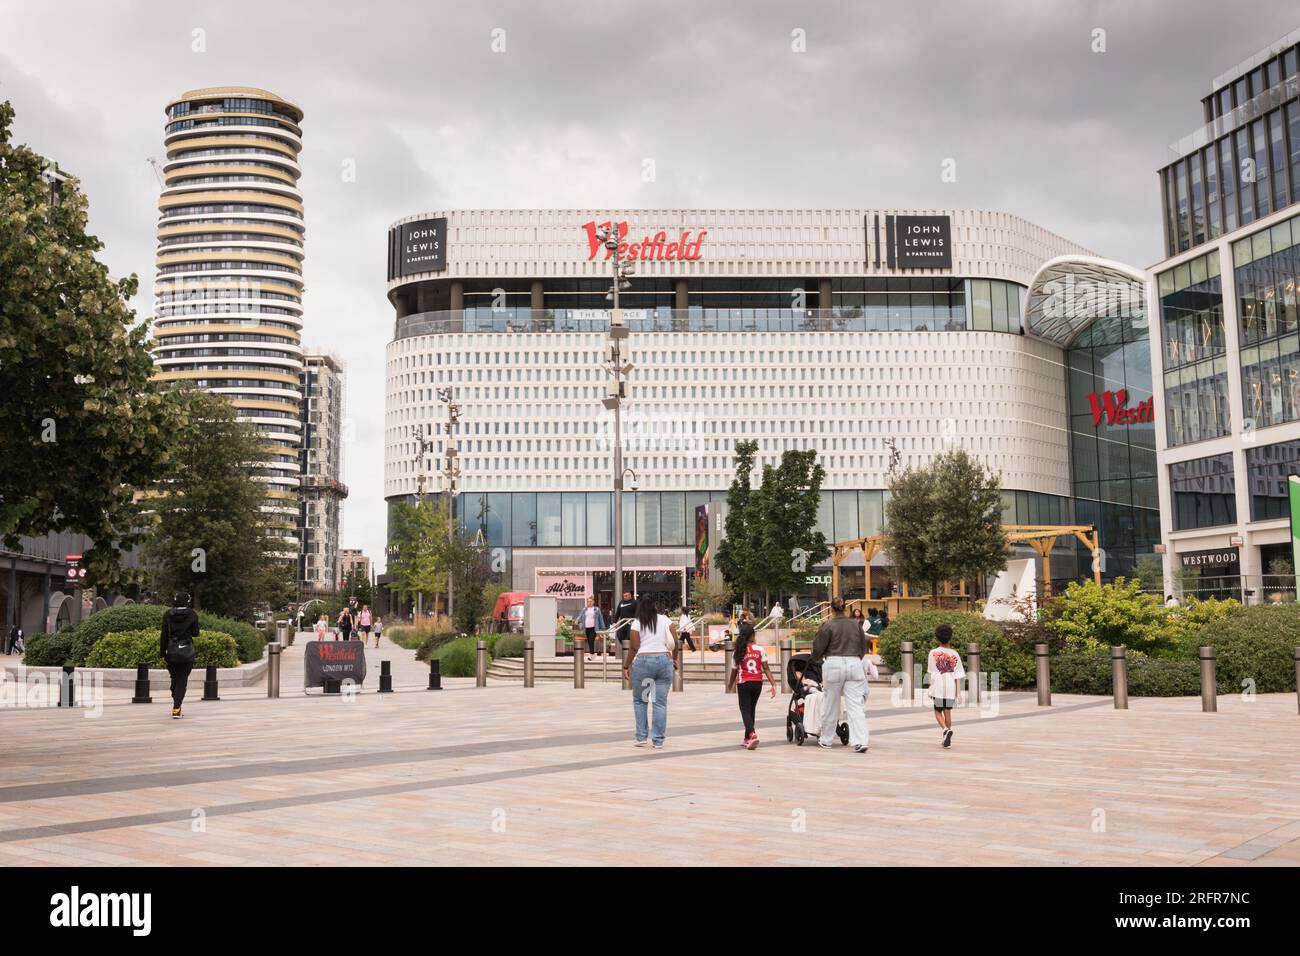 Westfield London - a shopping centre in White City in the London Borough of Hammersmith and Fulham, London, England, U.K. Stock Photo